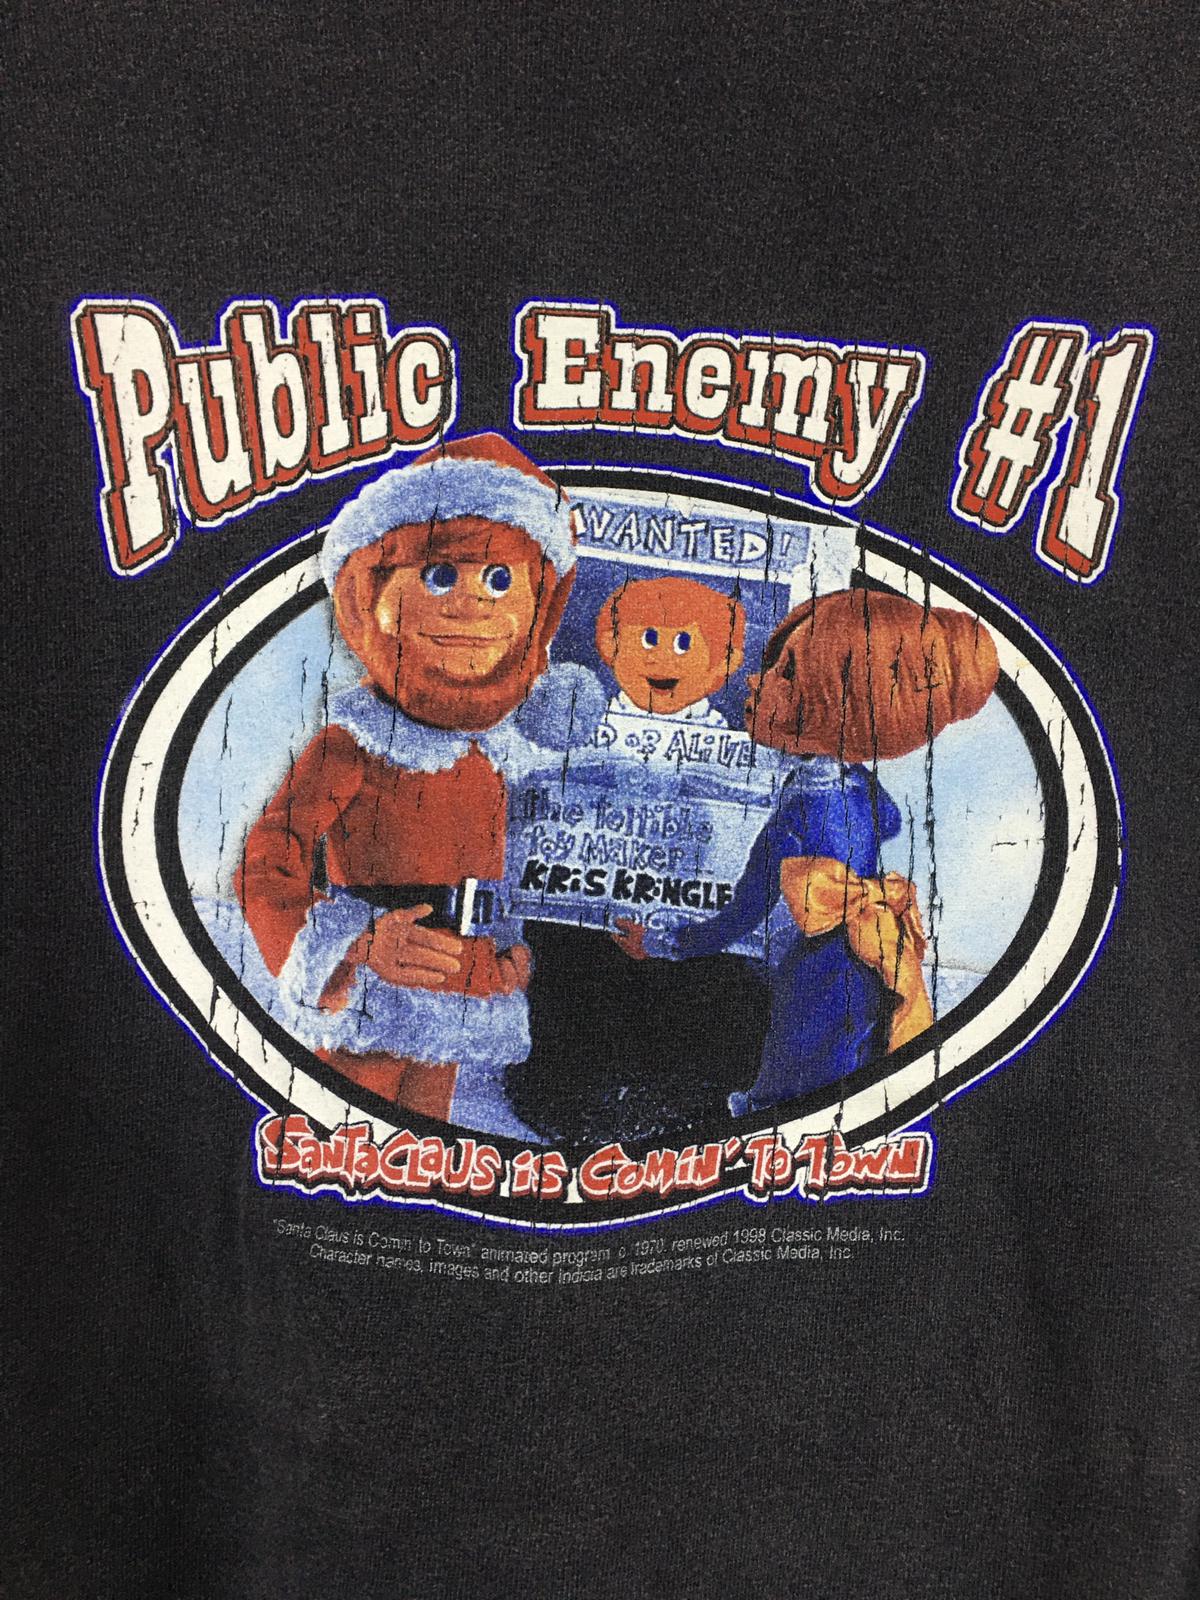 Vintage Public Enemy "Santaclaus is comin' to town" 1998